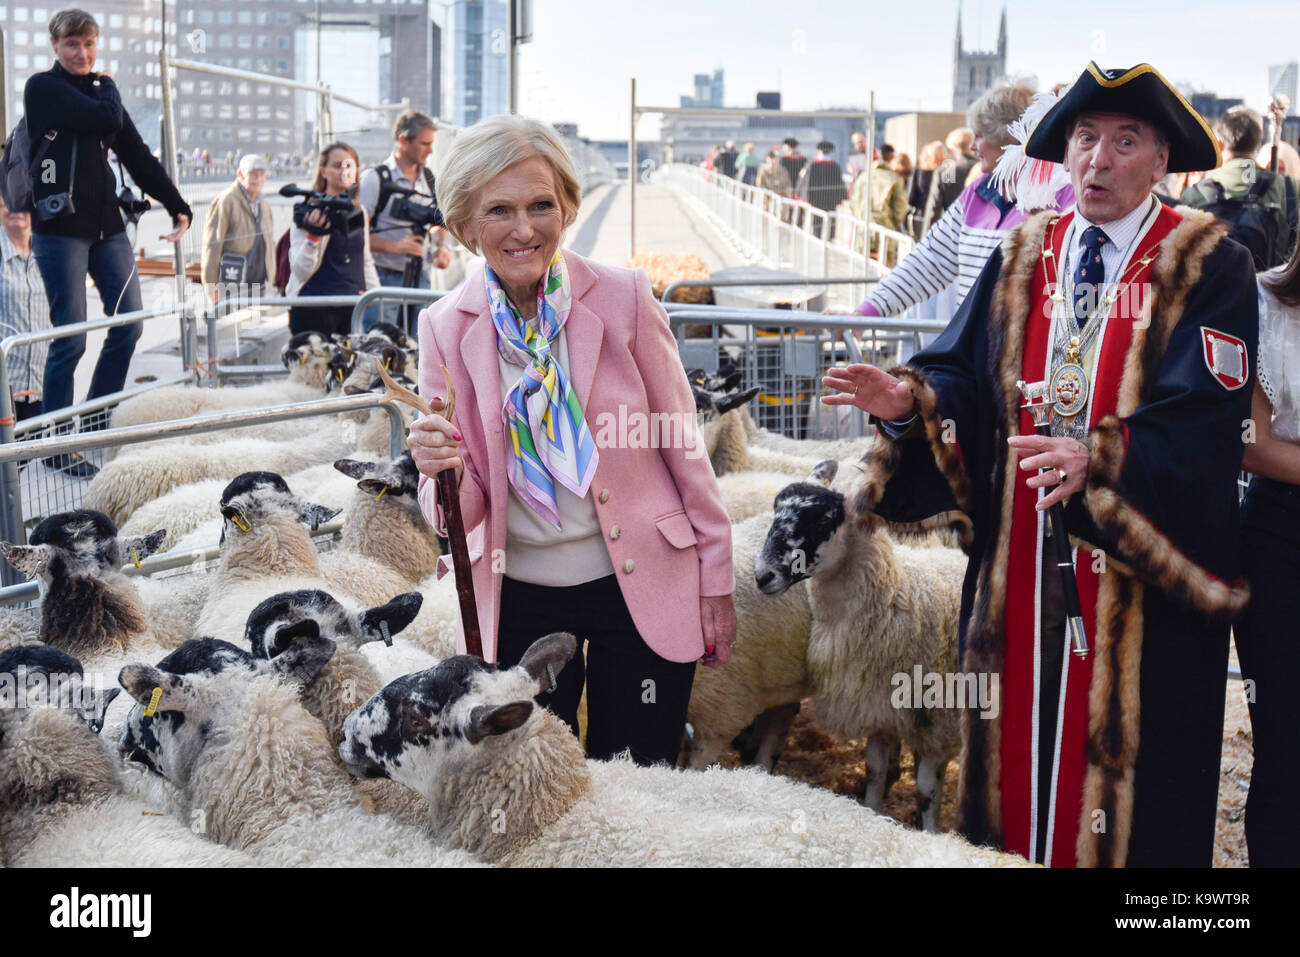 London, UK.  24 September 2017.  Mary Berry, celebrity TV baker and chef, leads the annual Sheep Drive of the Worshipful Company of Woolmen across London Bridge ahead of being made a Freeman of the City of London.  The event raises funds for the Lord Mayor's Appeal and the Woolmen's Charitable Trust. Credit: Stephen Chung / Alamy Live News Stock Photo